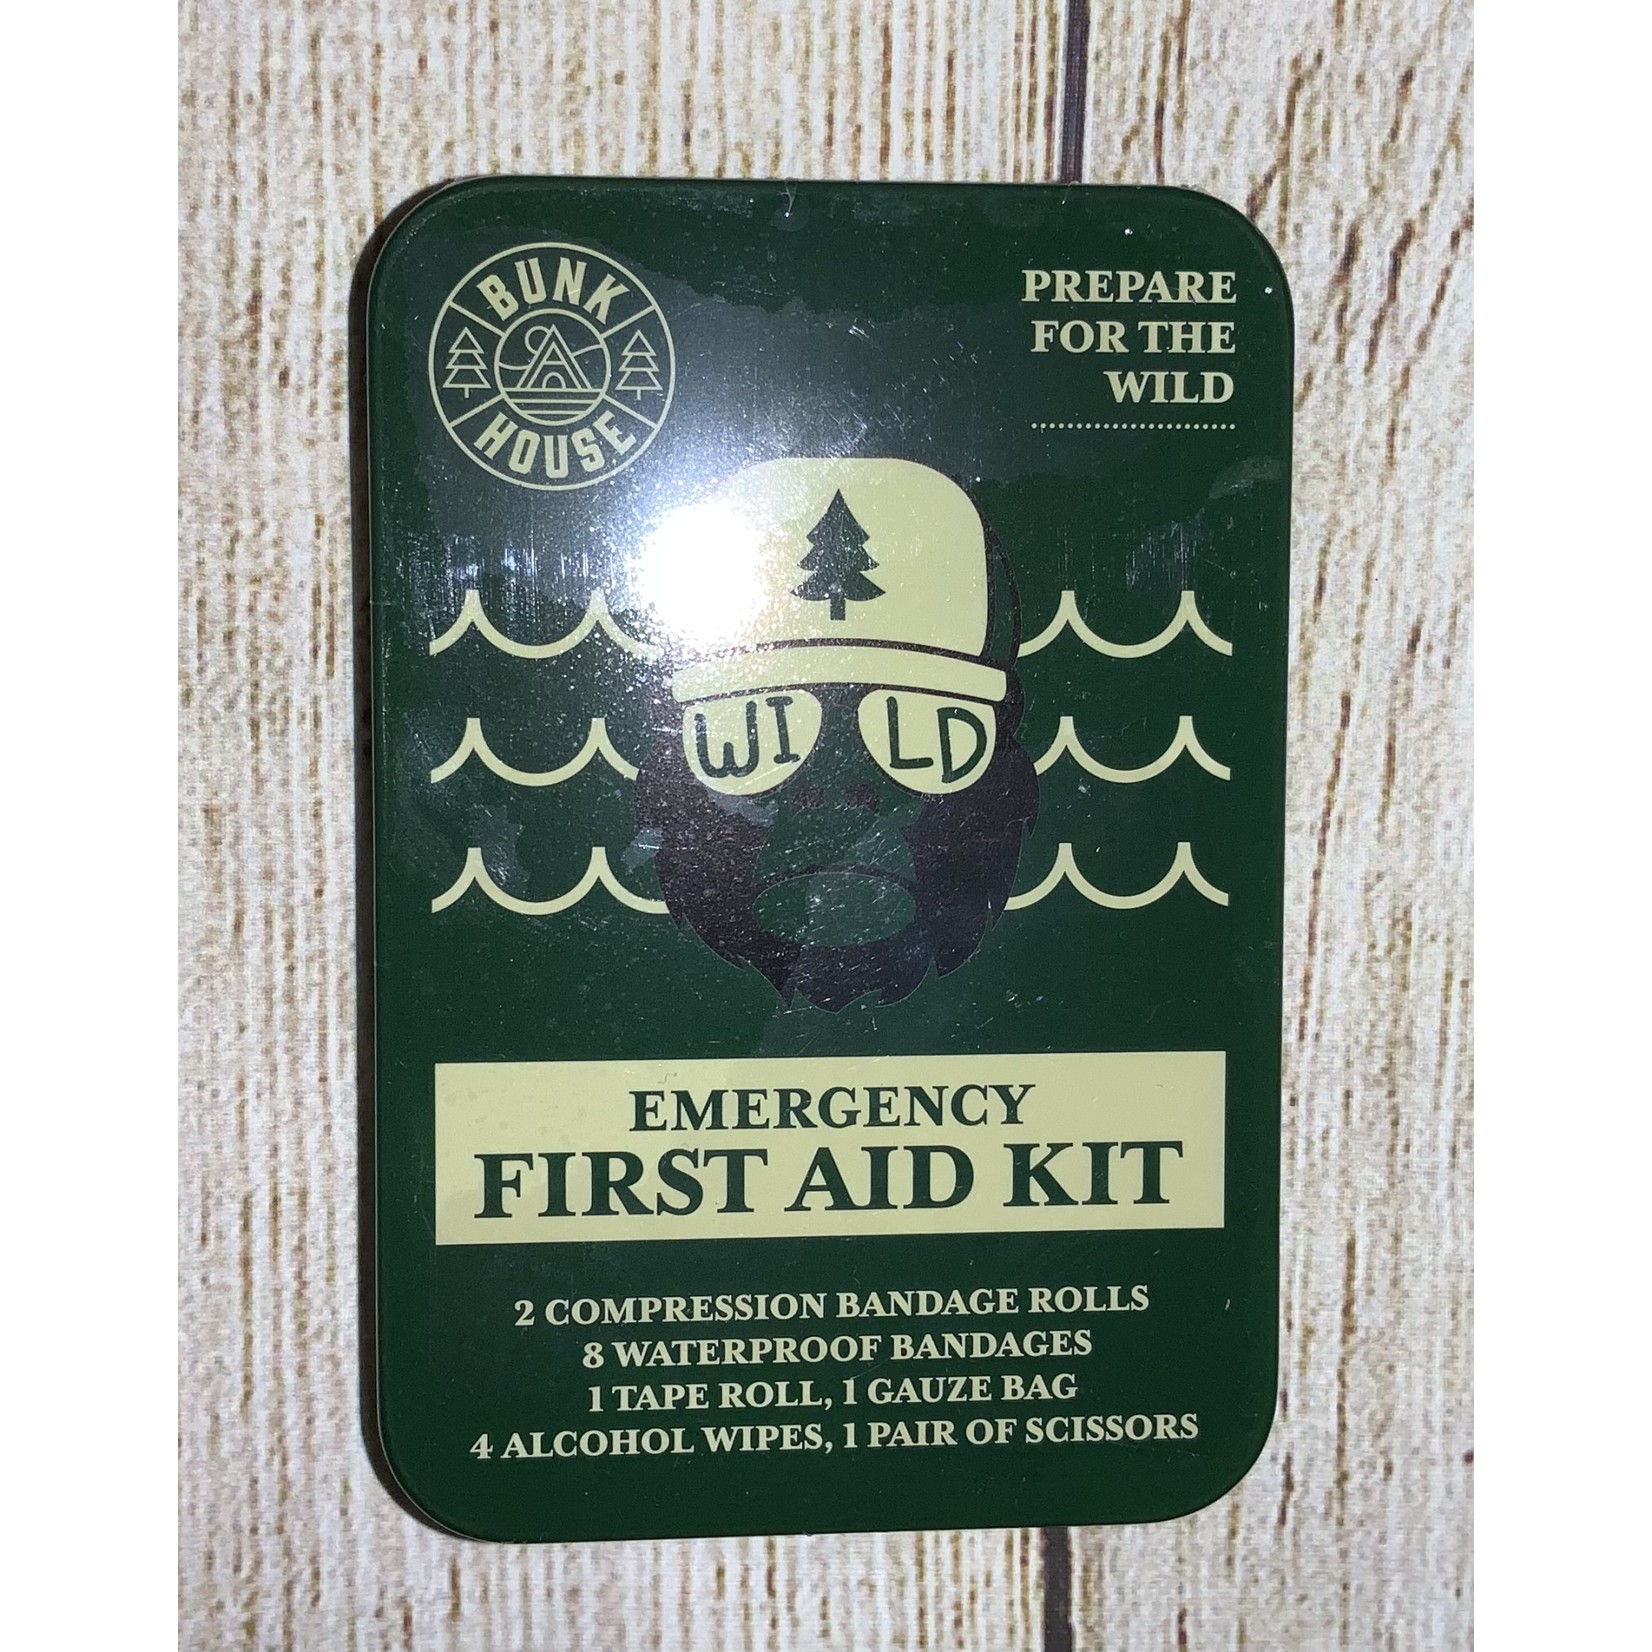 Bunk House Bunk House Emergency First Aid Kit Wild/Green